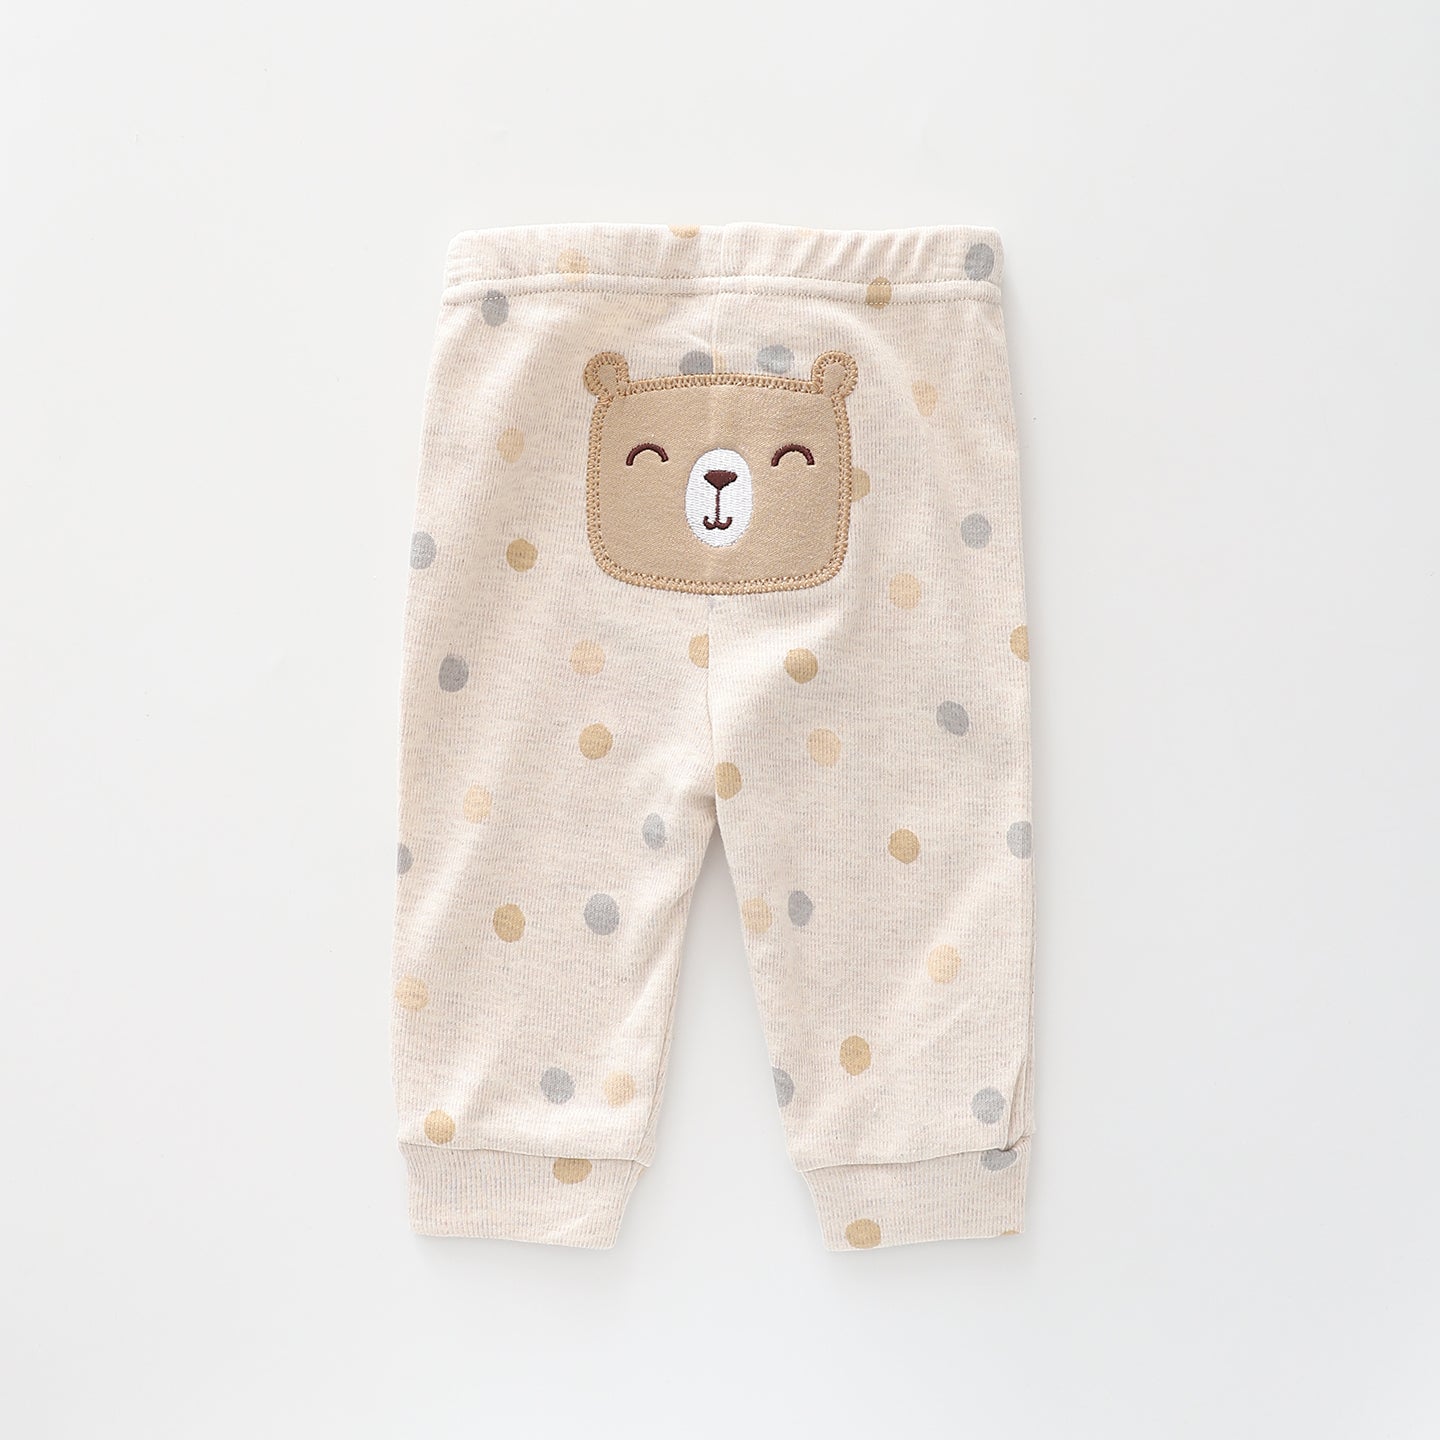 Shop Baby Pants Online at Best Price at Mothercare India | Leggings price, Baby  pants, Baby jeans